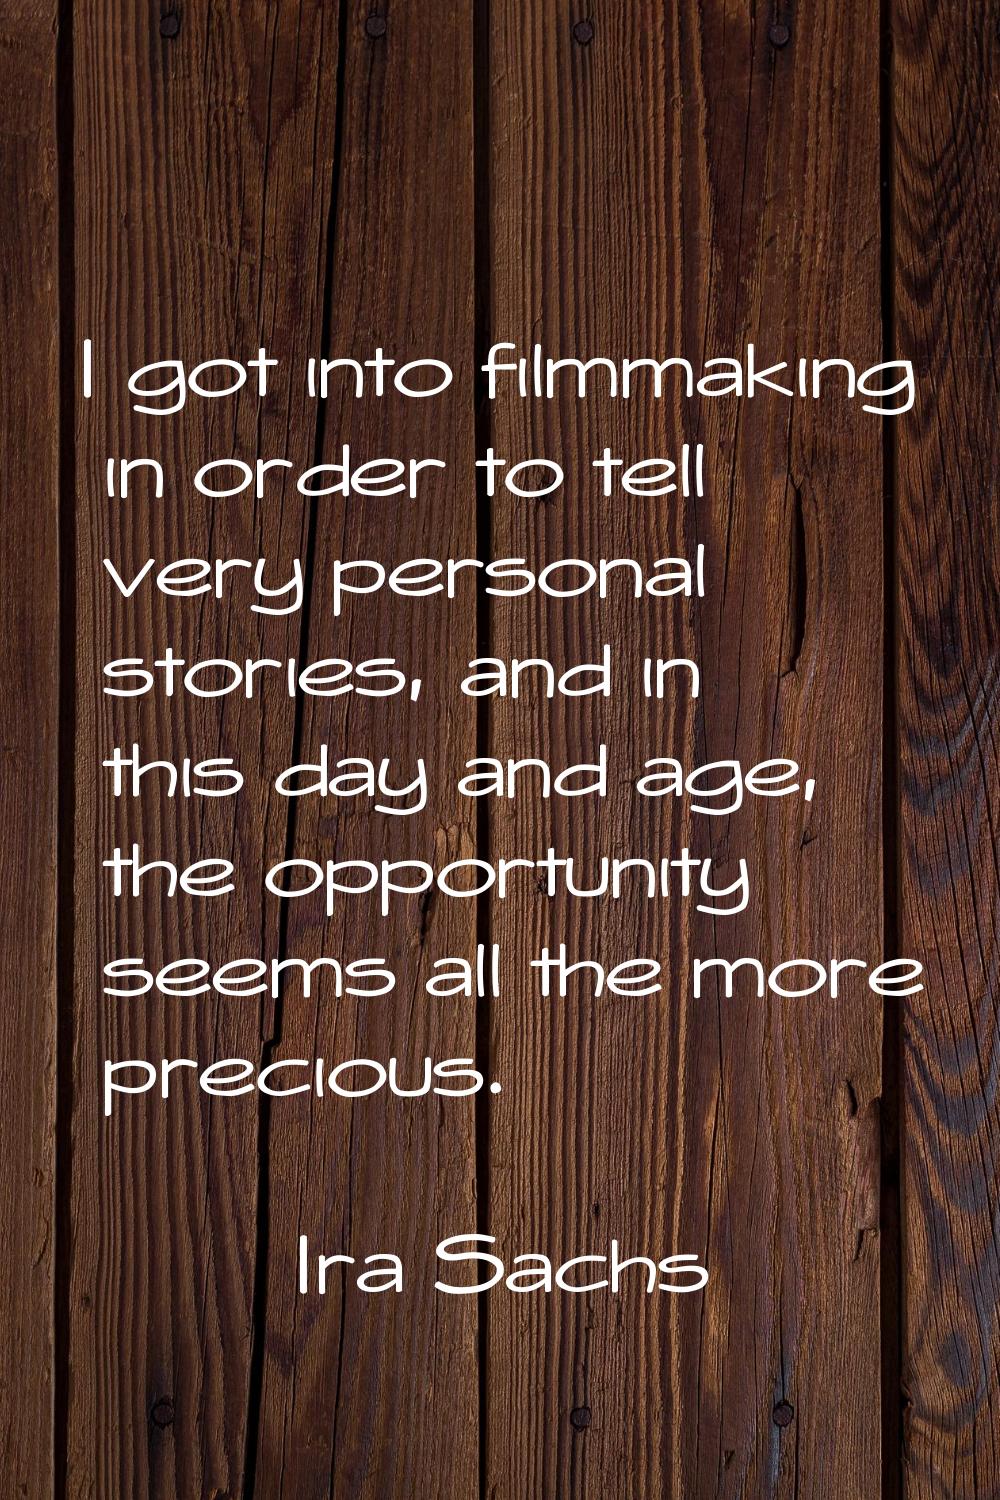 I got into filmmaking in order to tell very personal stories, and in this day and age, the opportun